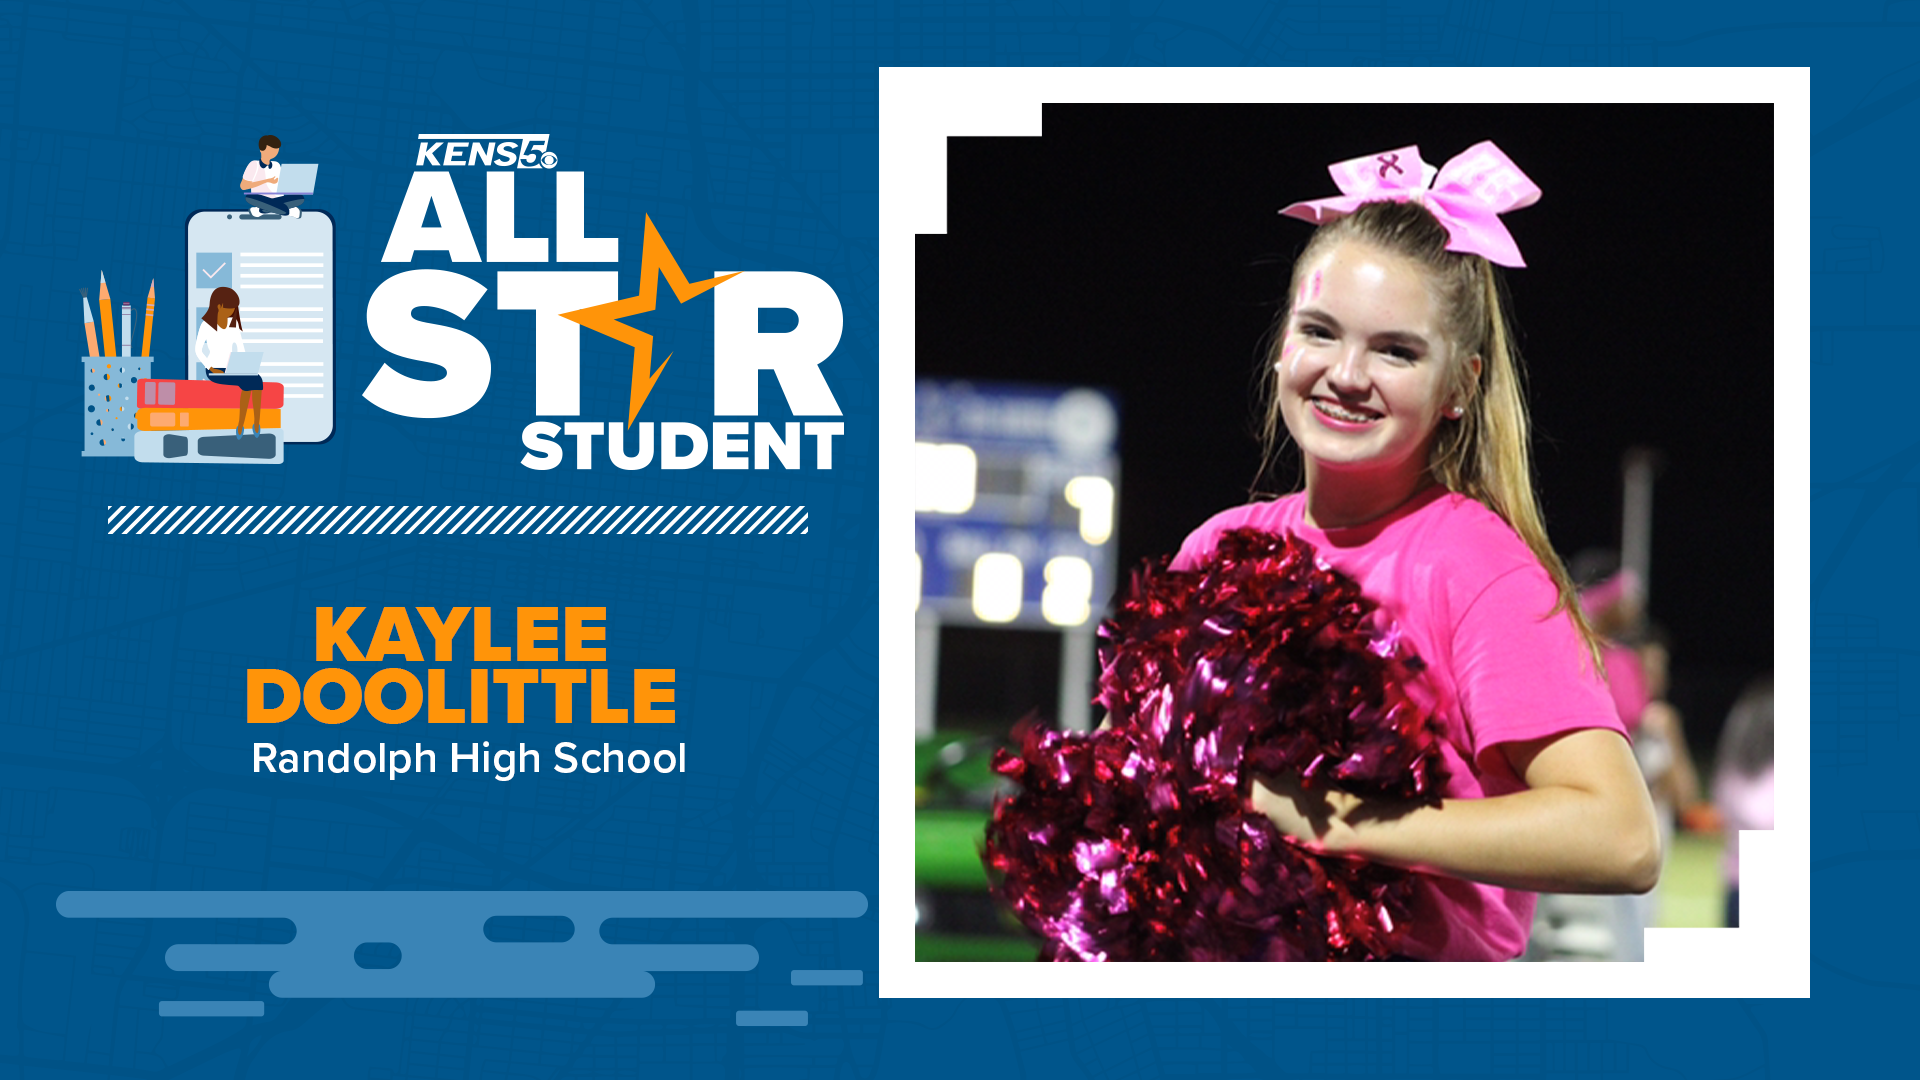 Kaylee Doolittle is the KENS 5 All-Star Student.